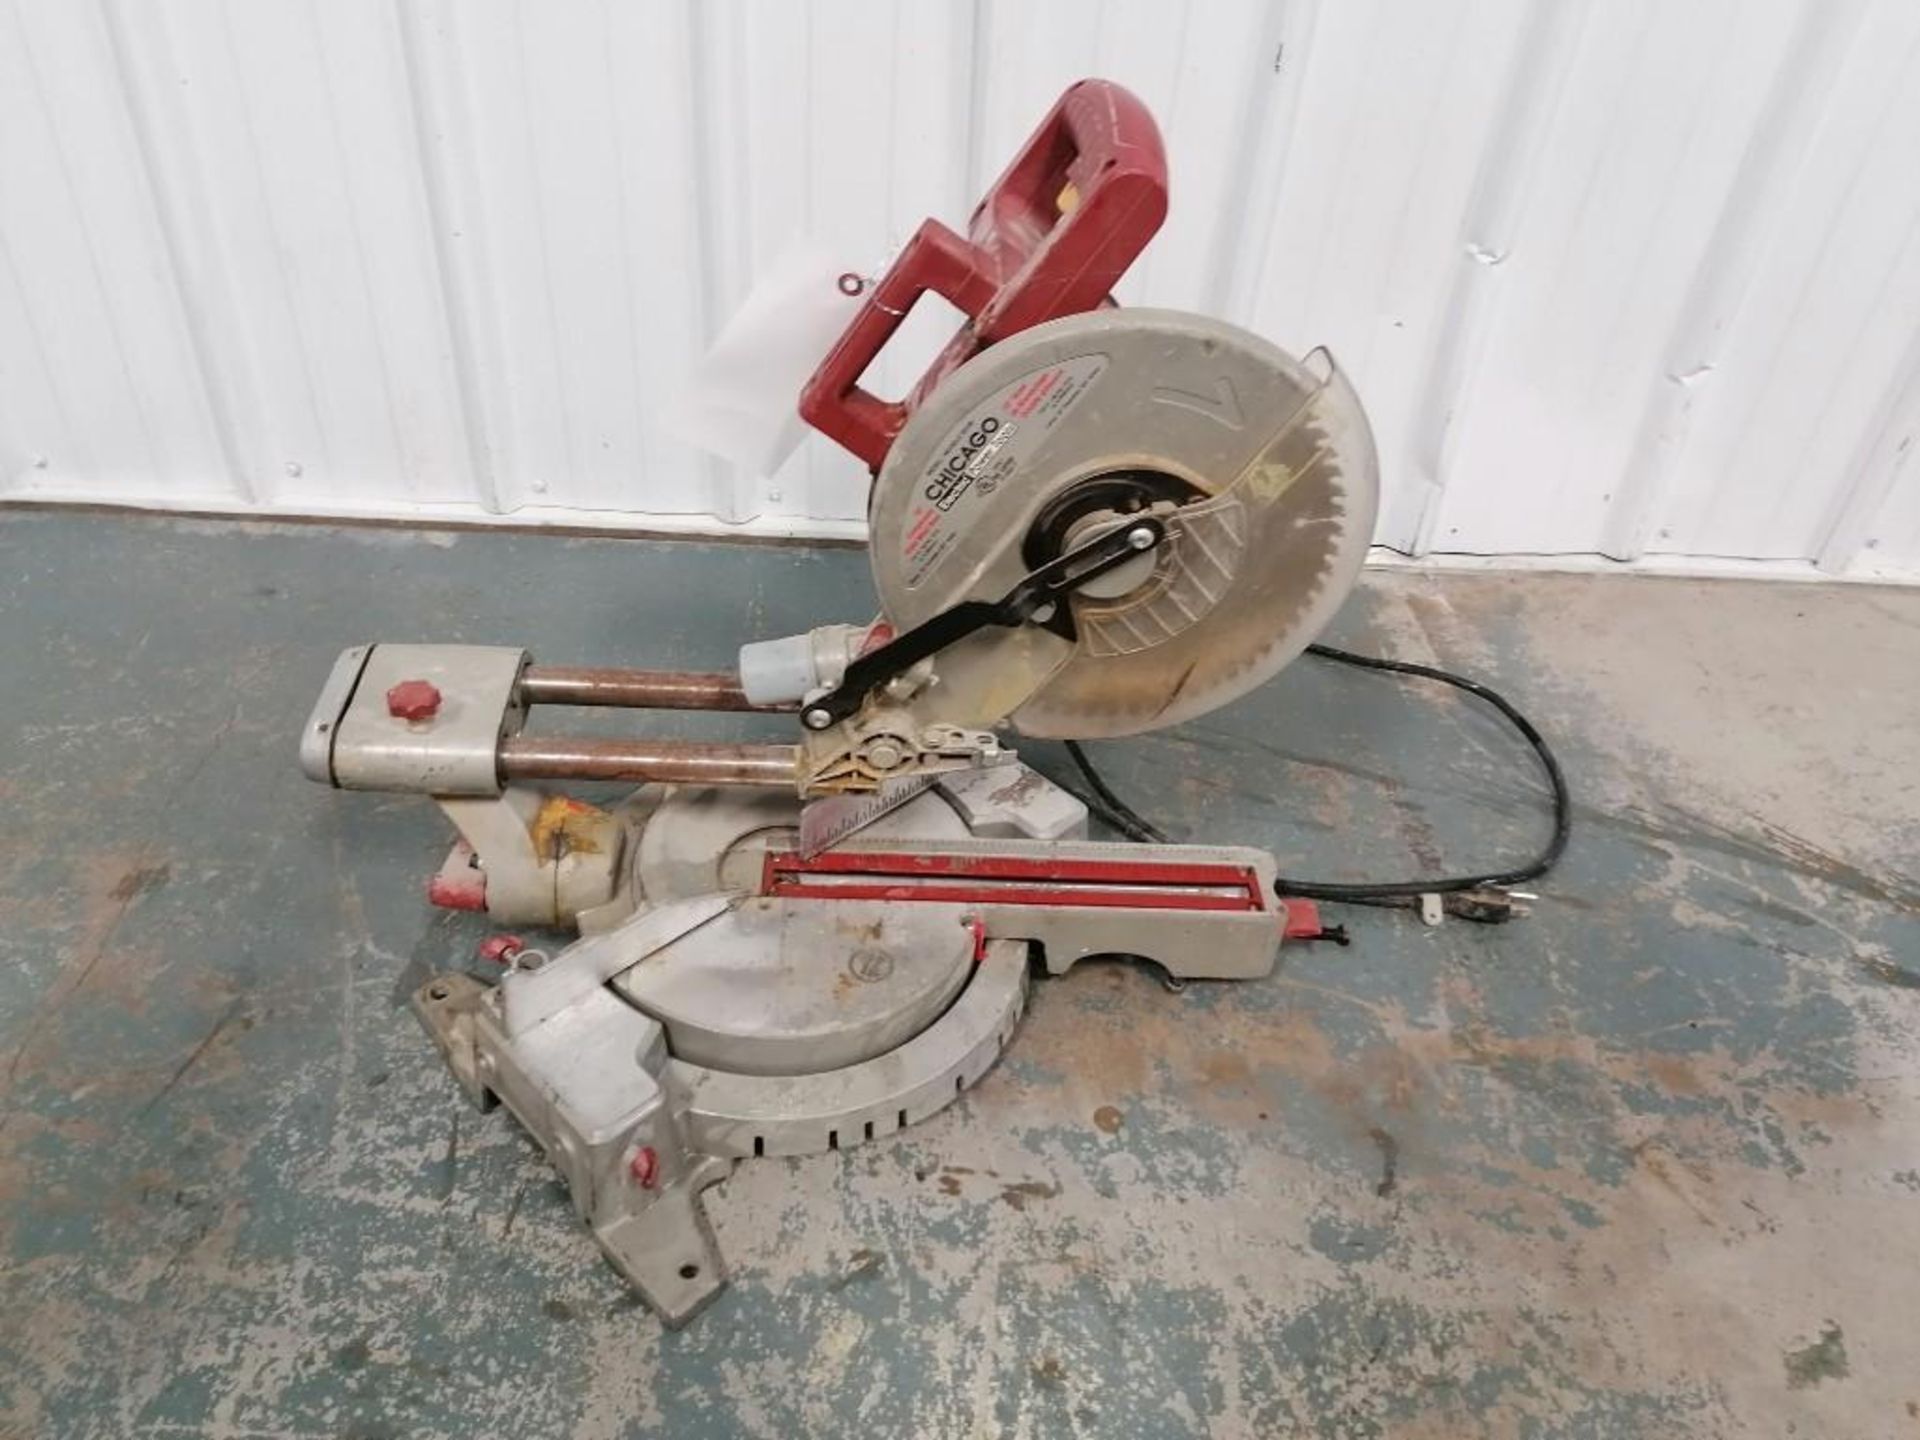 (1) CHICAGO 10" Compound Slide Miter Saw, Model 98199. Located in Mt. Peasant, IA.